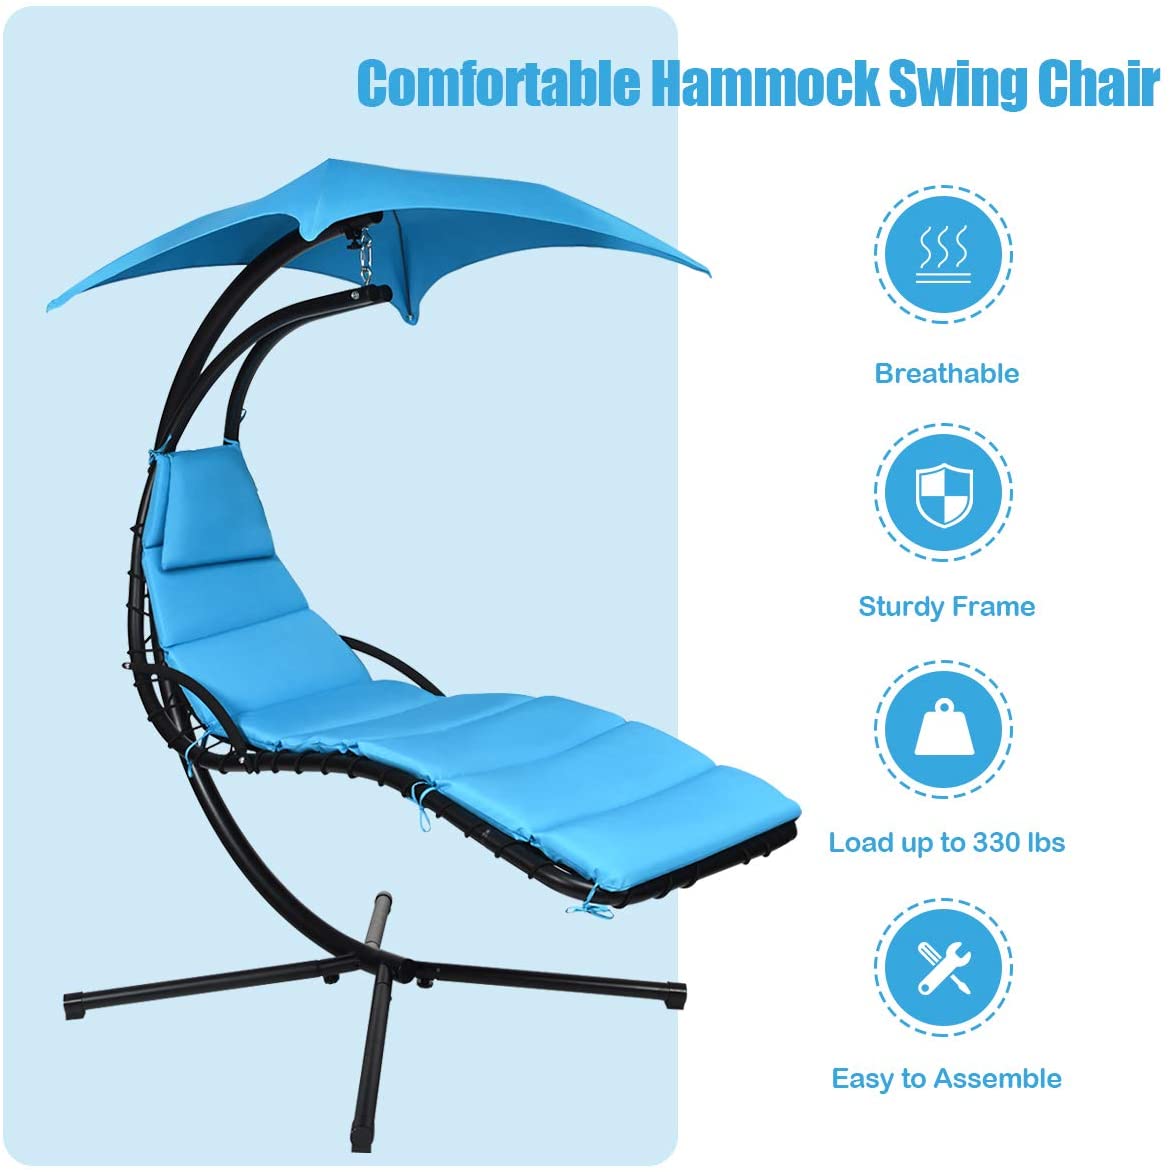 Hanging Chaise Lounger Chair, Arc Stand Porch Swing Chair - Giantex